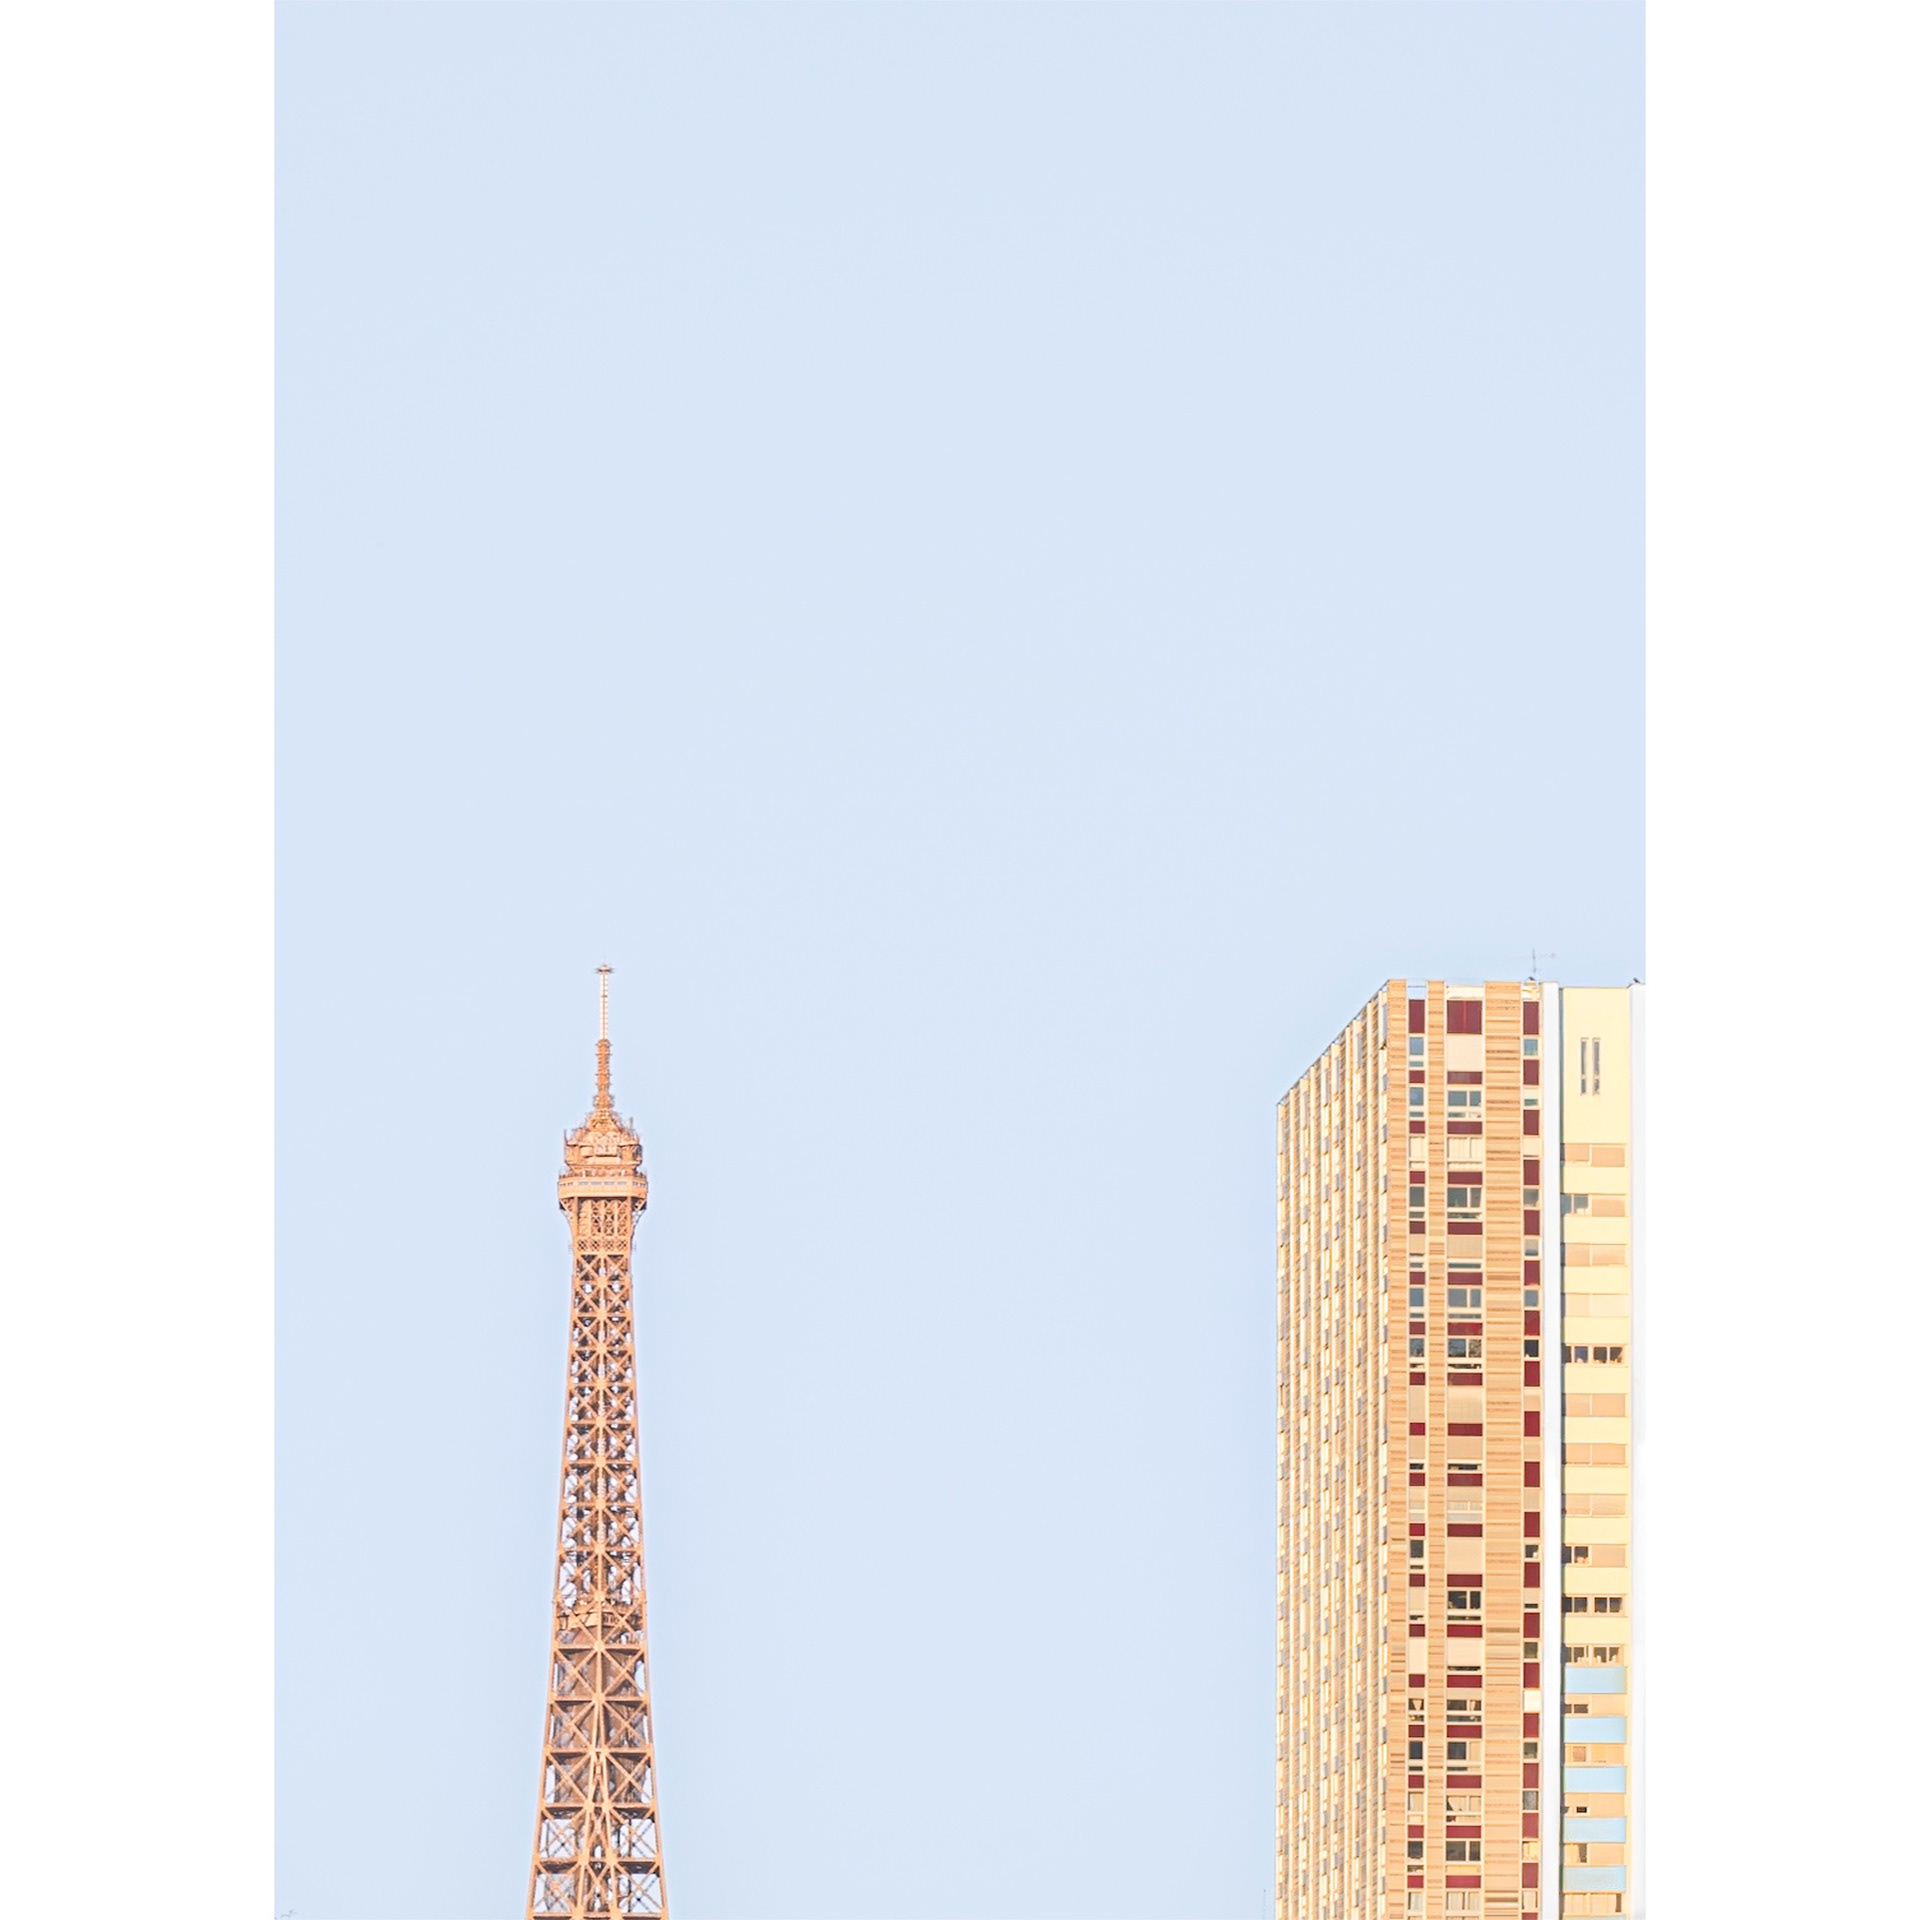 Top of the Eiffel Tower next to an office building and a large clear sky. Abstract and minimalist composition with soft colors.